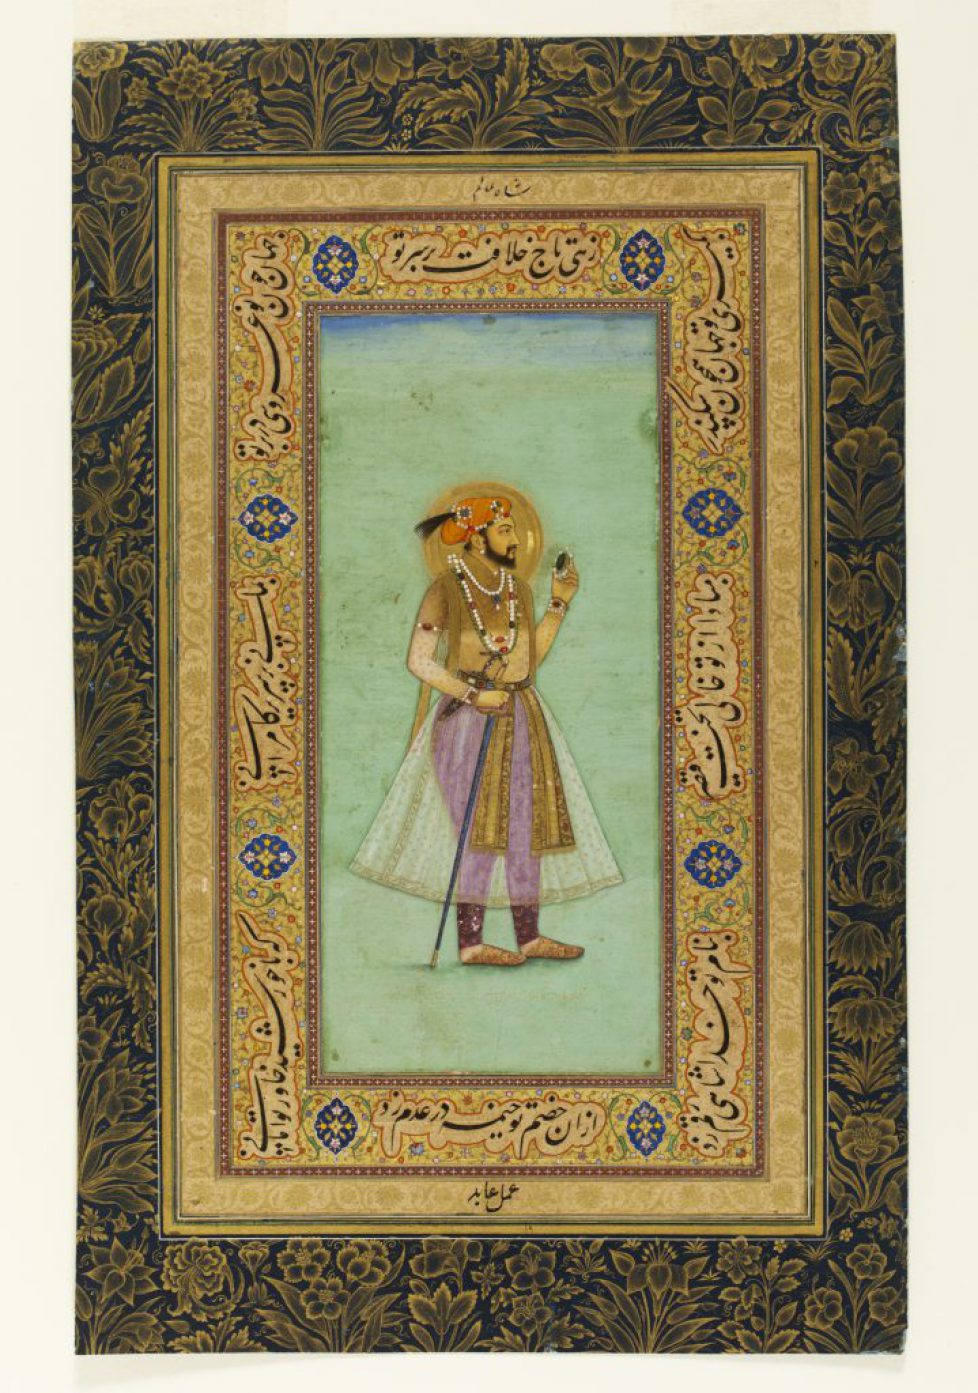 Portrait of Shah Jahan holding an emerald by Muhammad 'Abed, borders by Harif, c. 1628. Opaque watercolour and gold on paper. © Victoria and Albert Museum, London